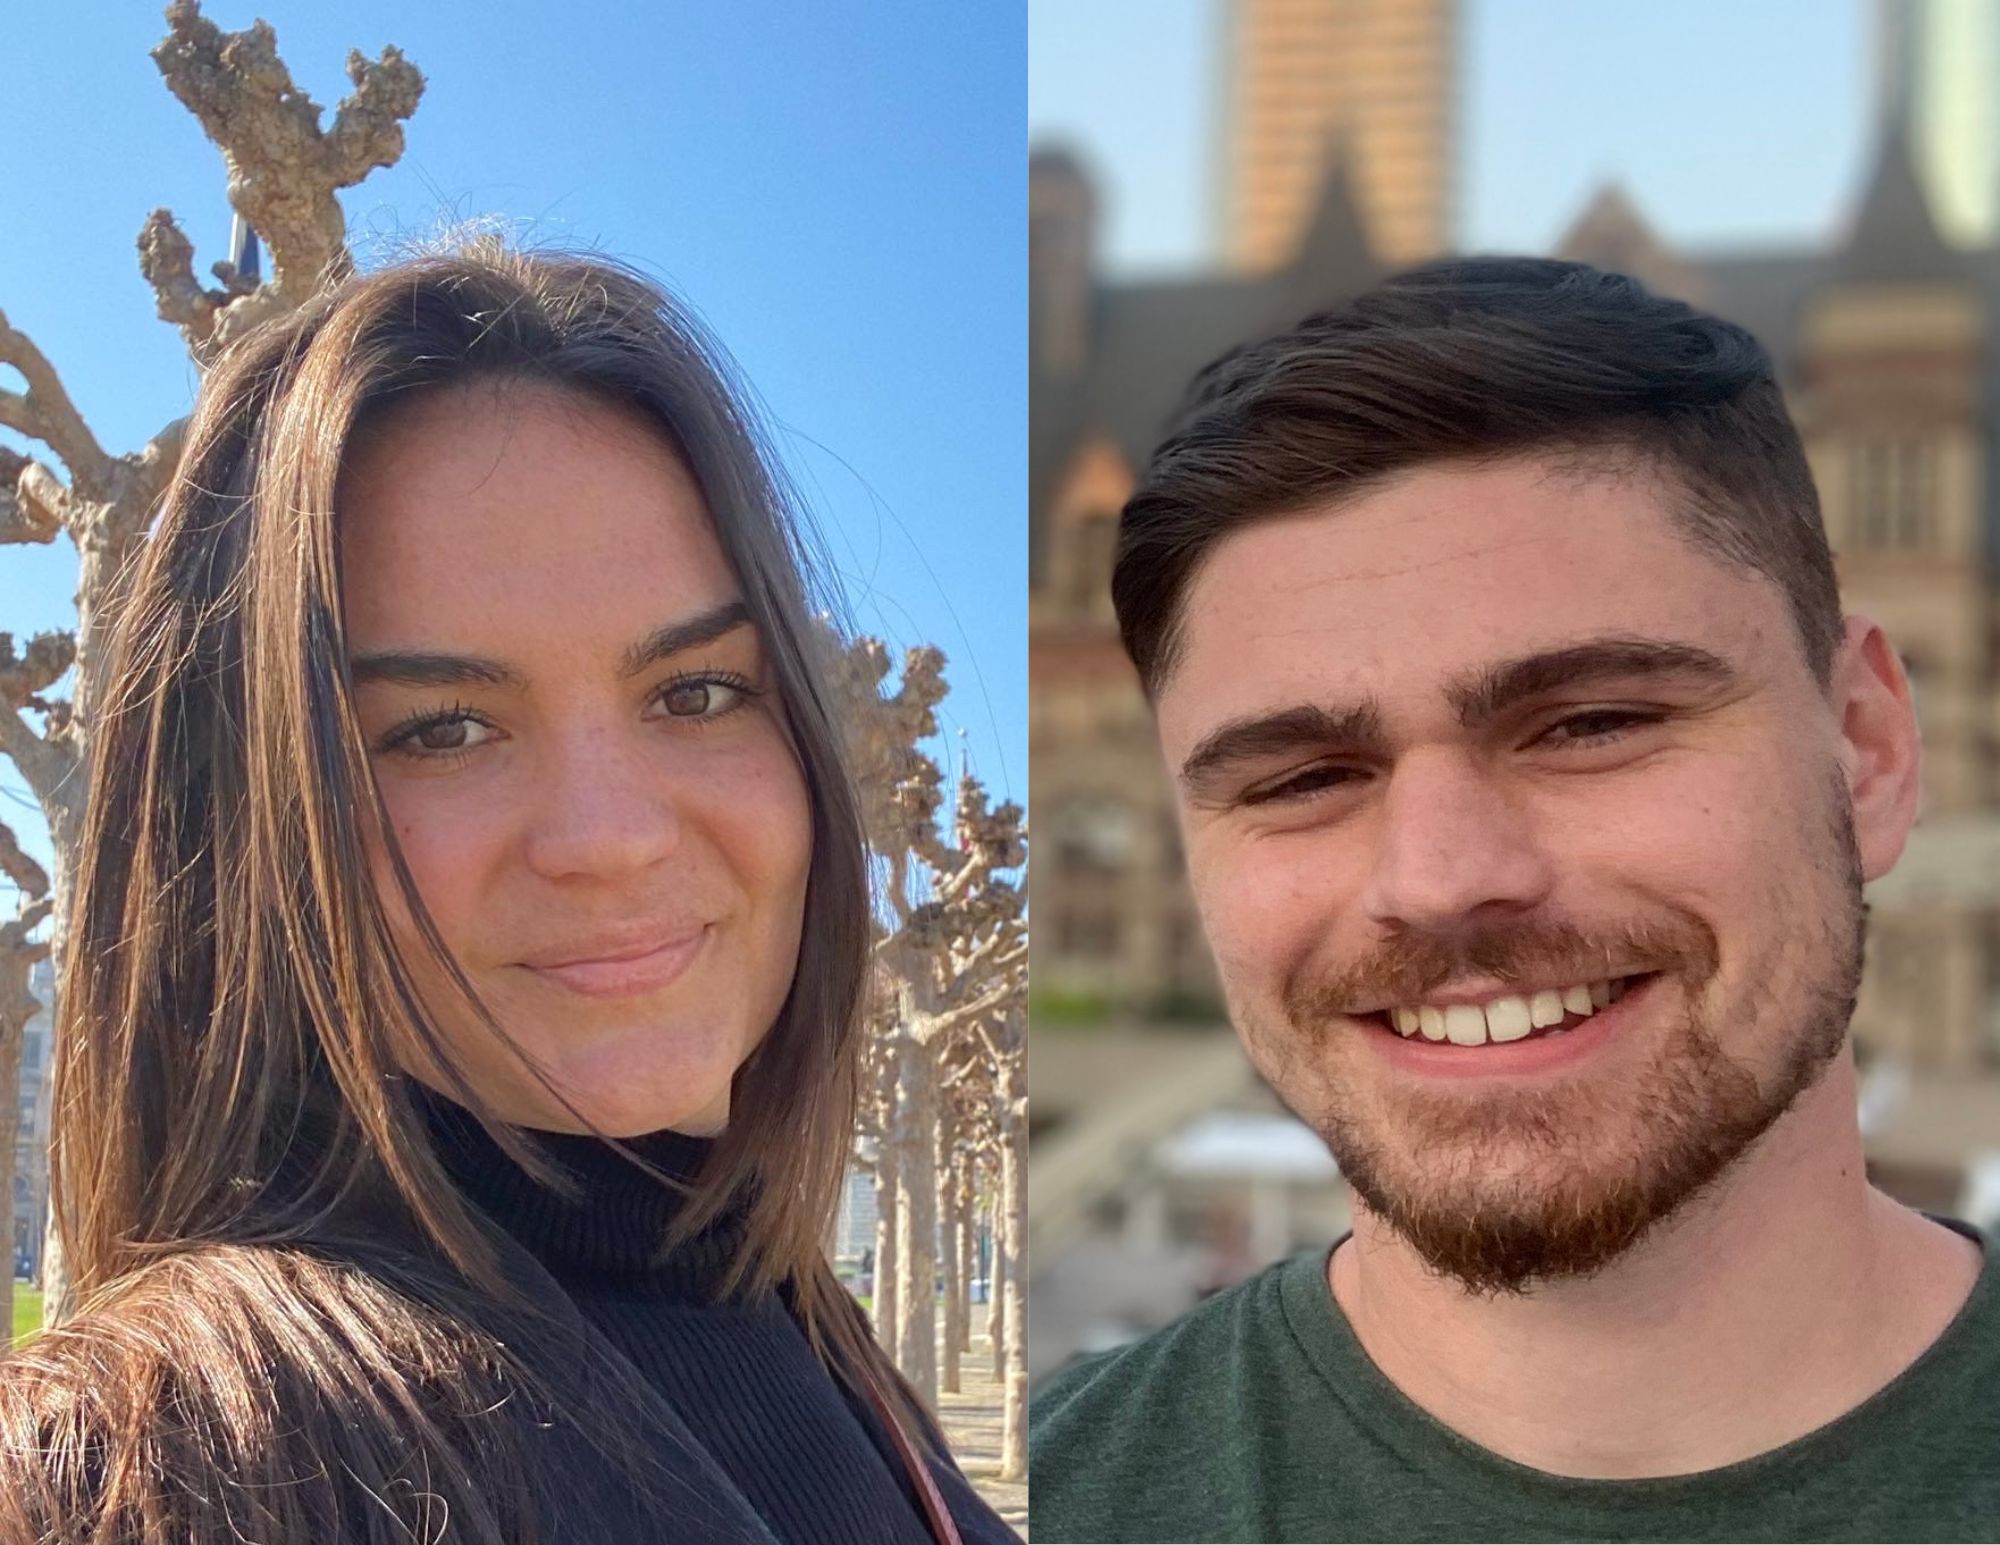 headshots of two recent law school graduates posting outdoors in San Francisco